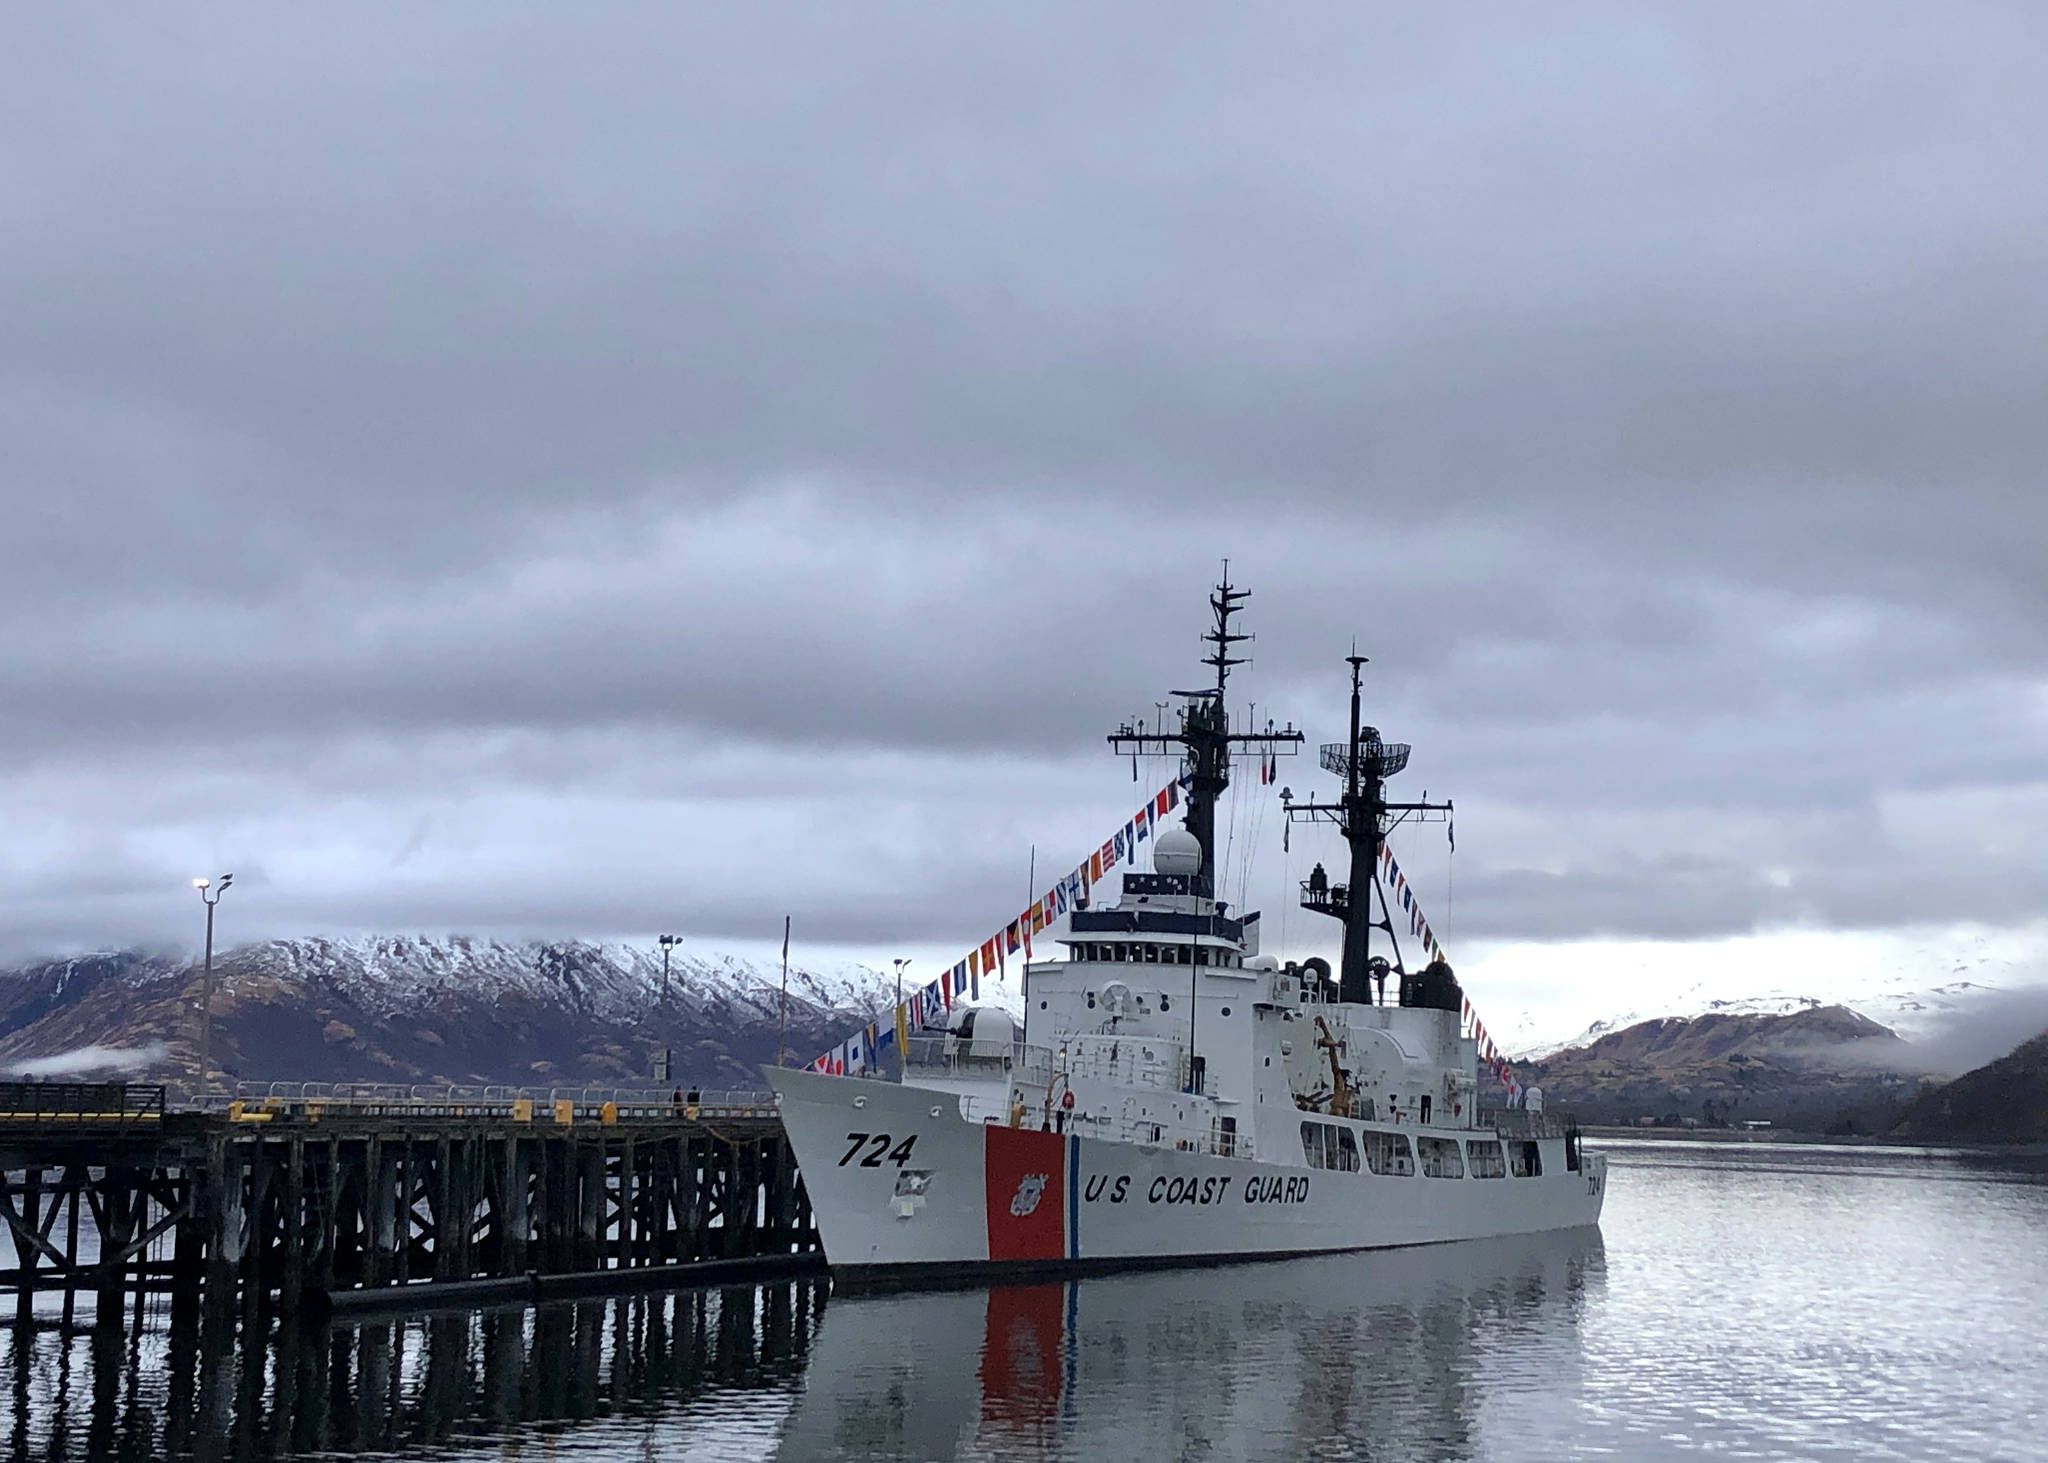 The Coast Guard Cutter Douglas Munro is moored at the cutter’s homeport of Kodiak, Alaska, April 24, 2021. The Douglas Munro was decommissioned during a ceremony following 49-years of service. (Chief Petty Officer Matt Masaschi / U.S. Coast Guard)